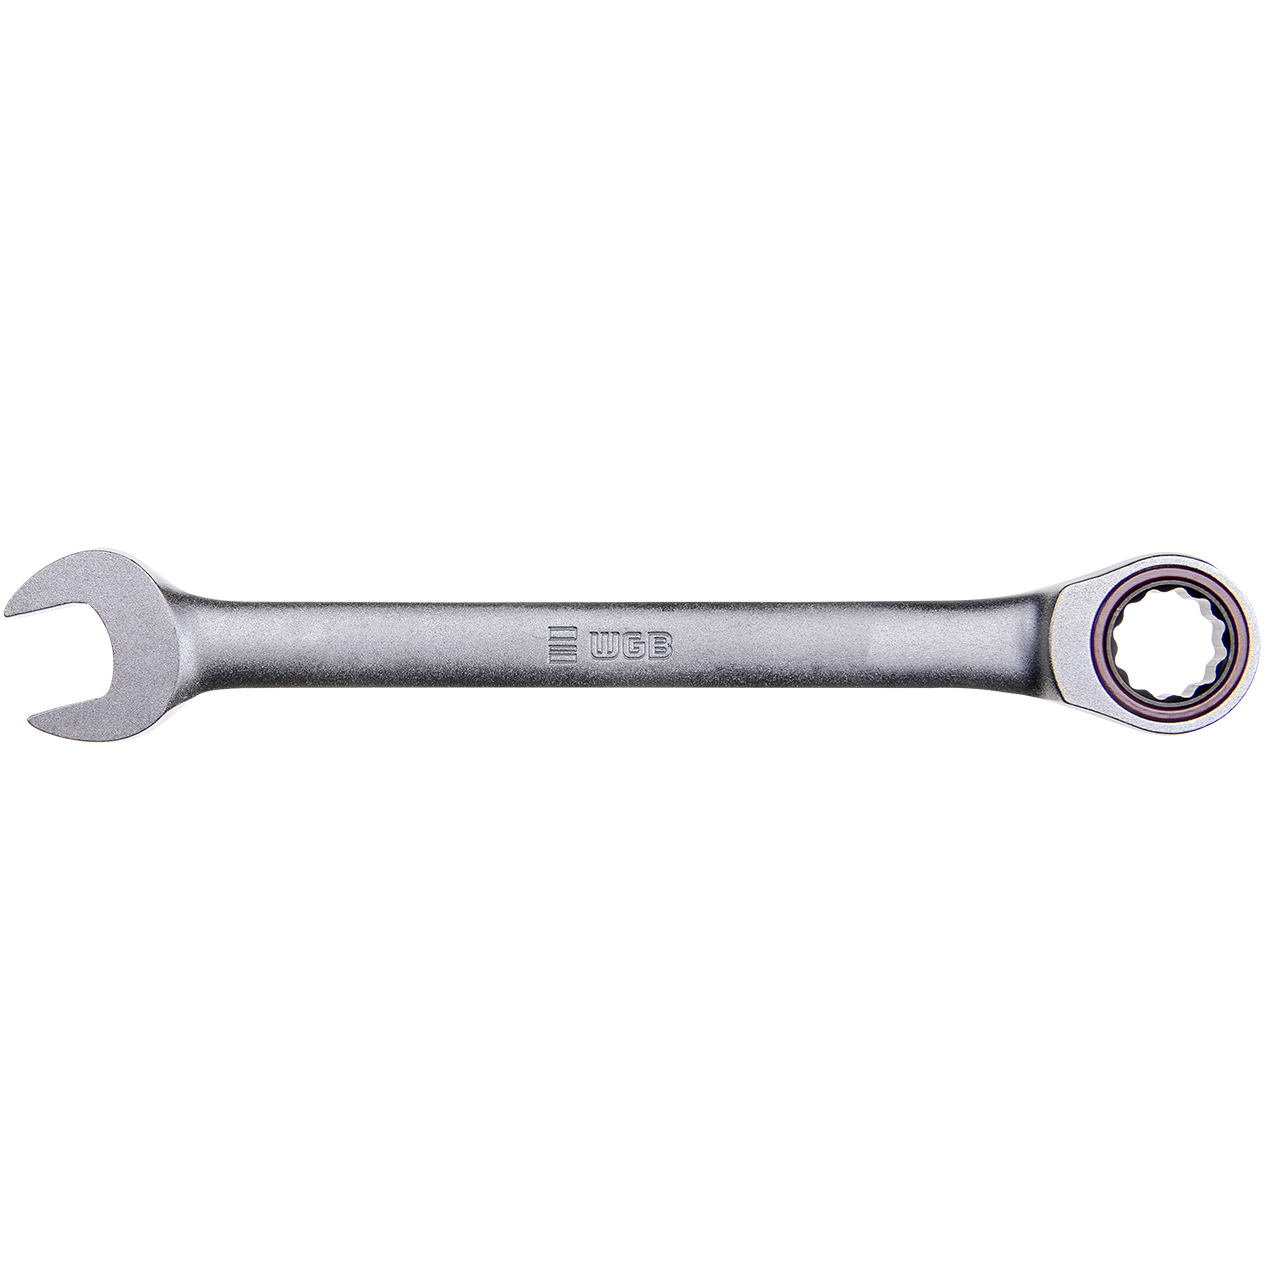 Combination Gear Wrench